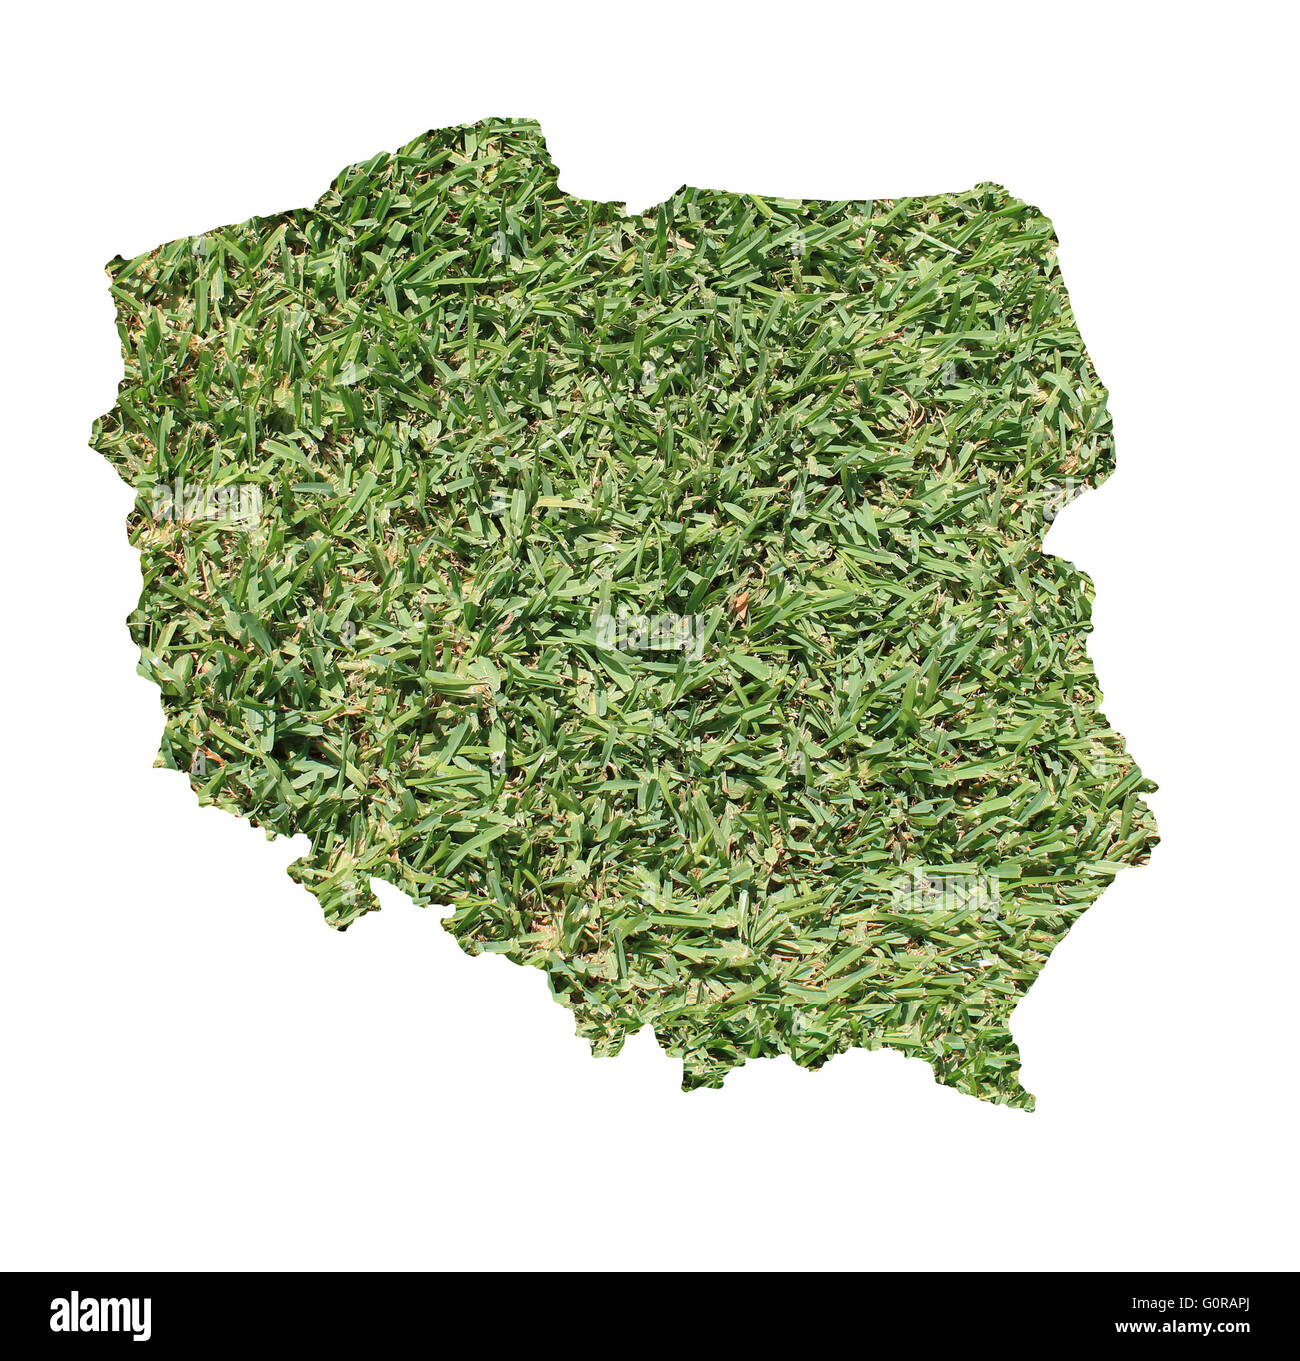 Map of Poland filled with green grass, environmental and ecological concept. Stock Photo